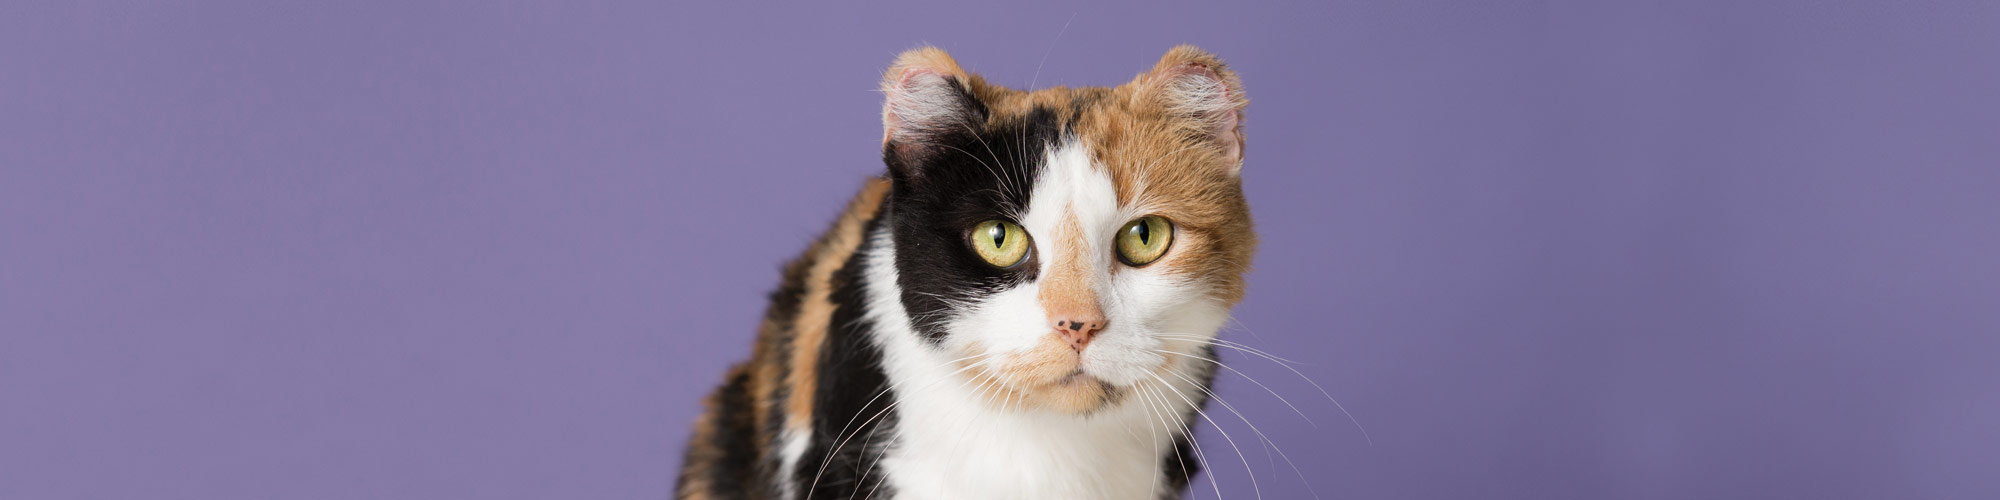 A cat with white, brown, and black markings looks forward at the camera